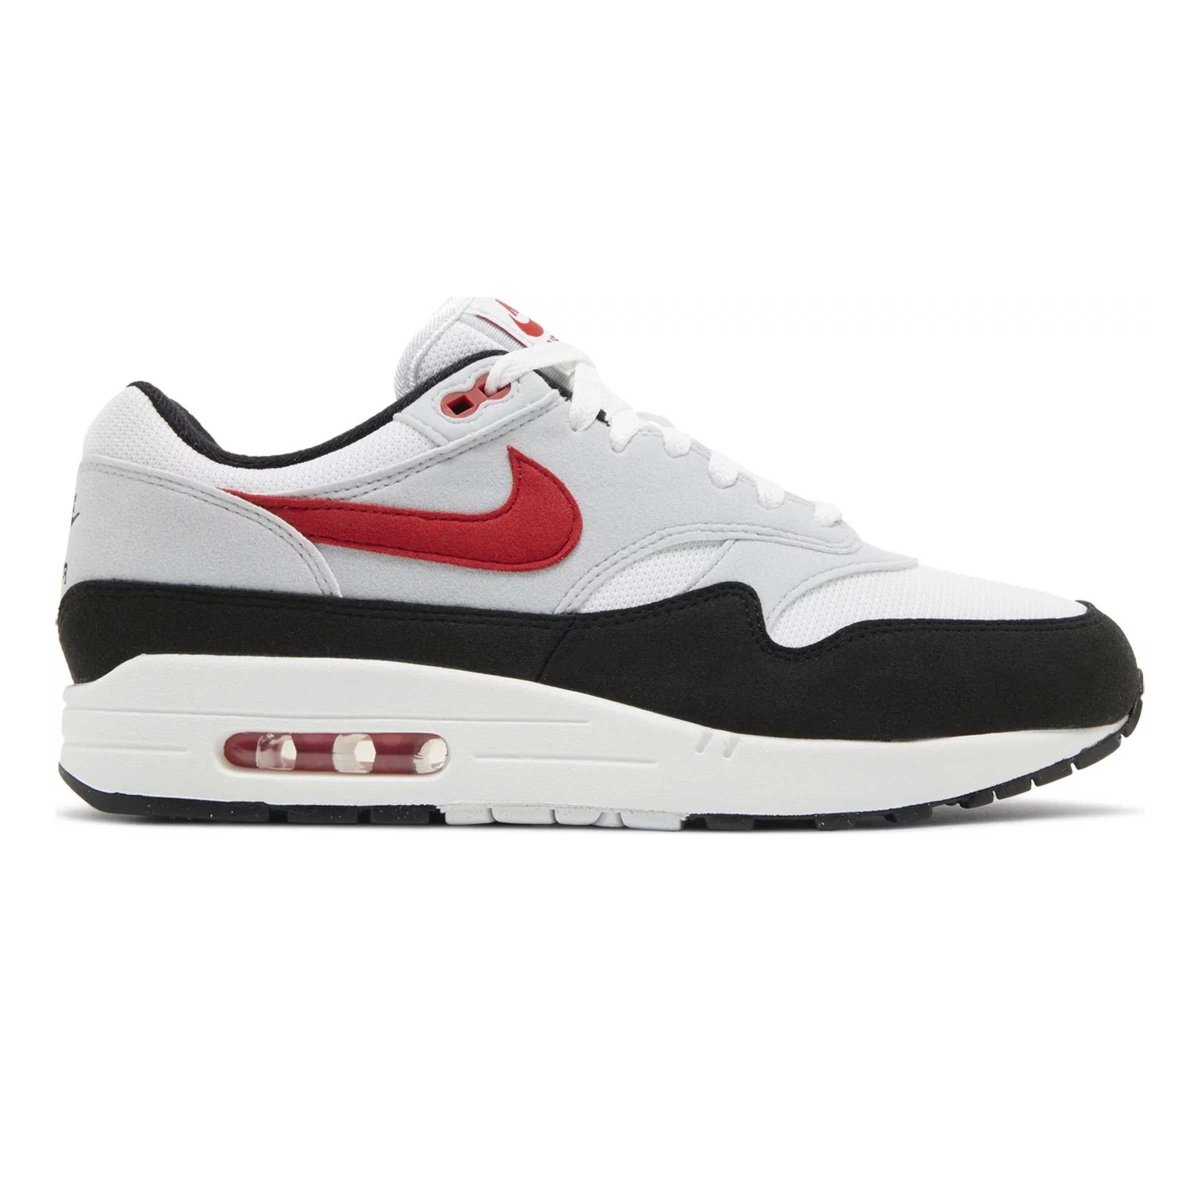 Nike Men's Air Max 1 'Chilli' - 10033922 - West NYC